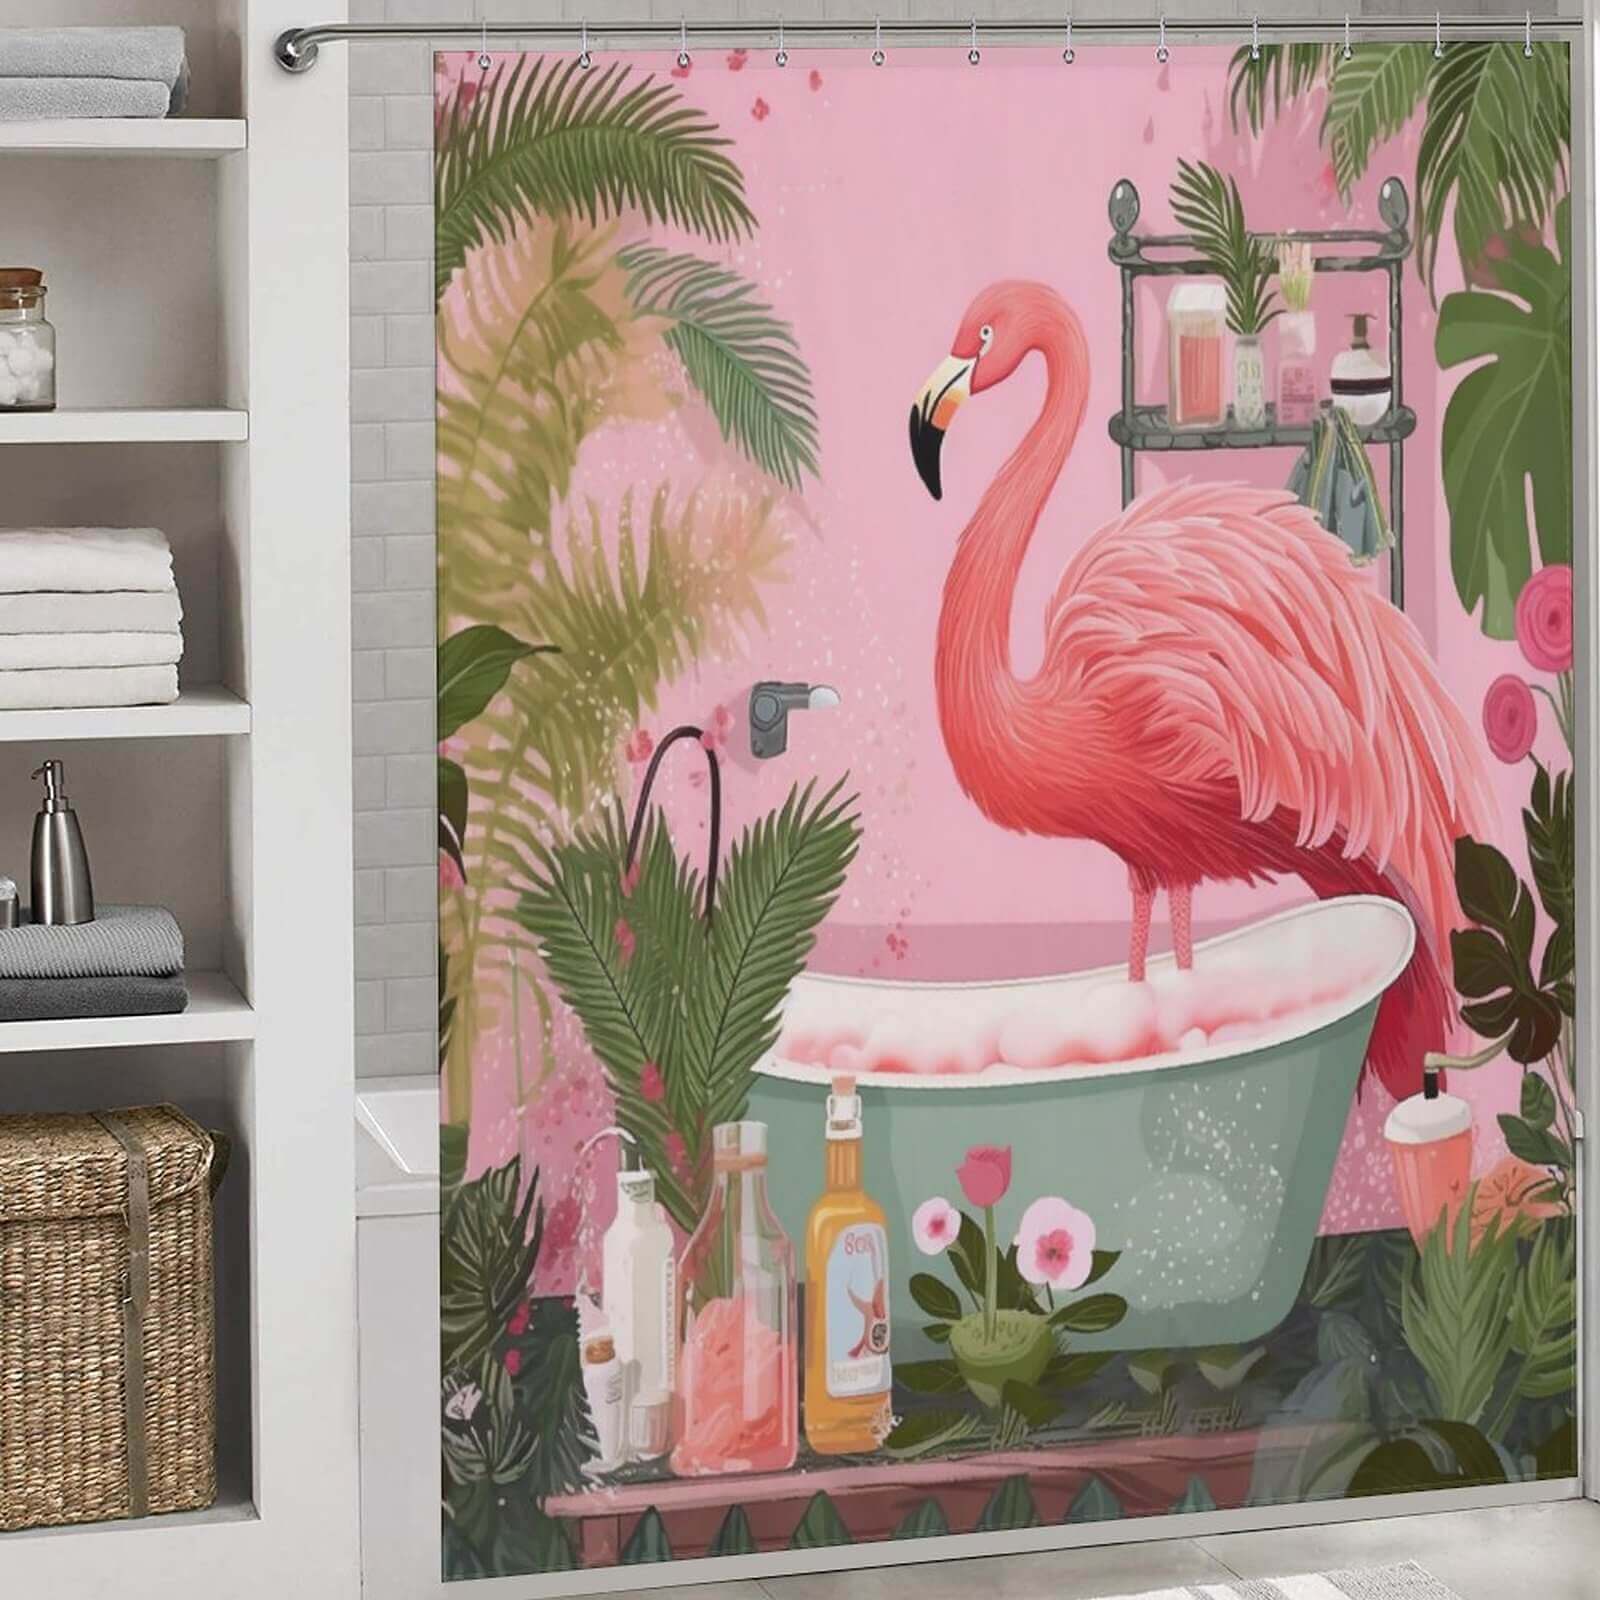 This Boho Tropical Flamingo Shower Curtain by Cotton Cat is the perfect addition to any bathroom.